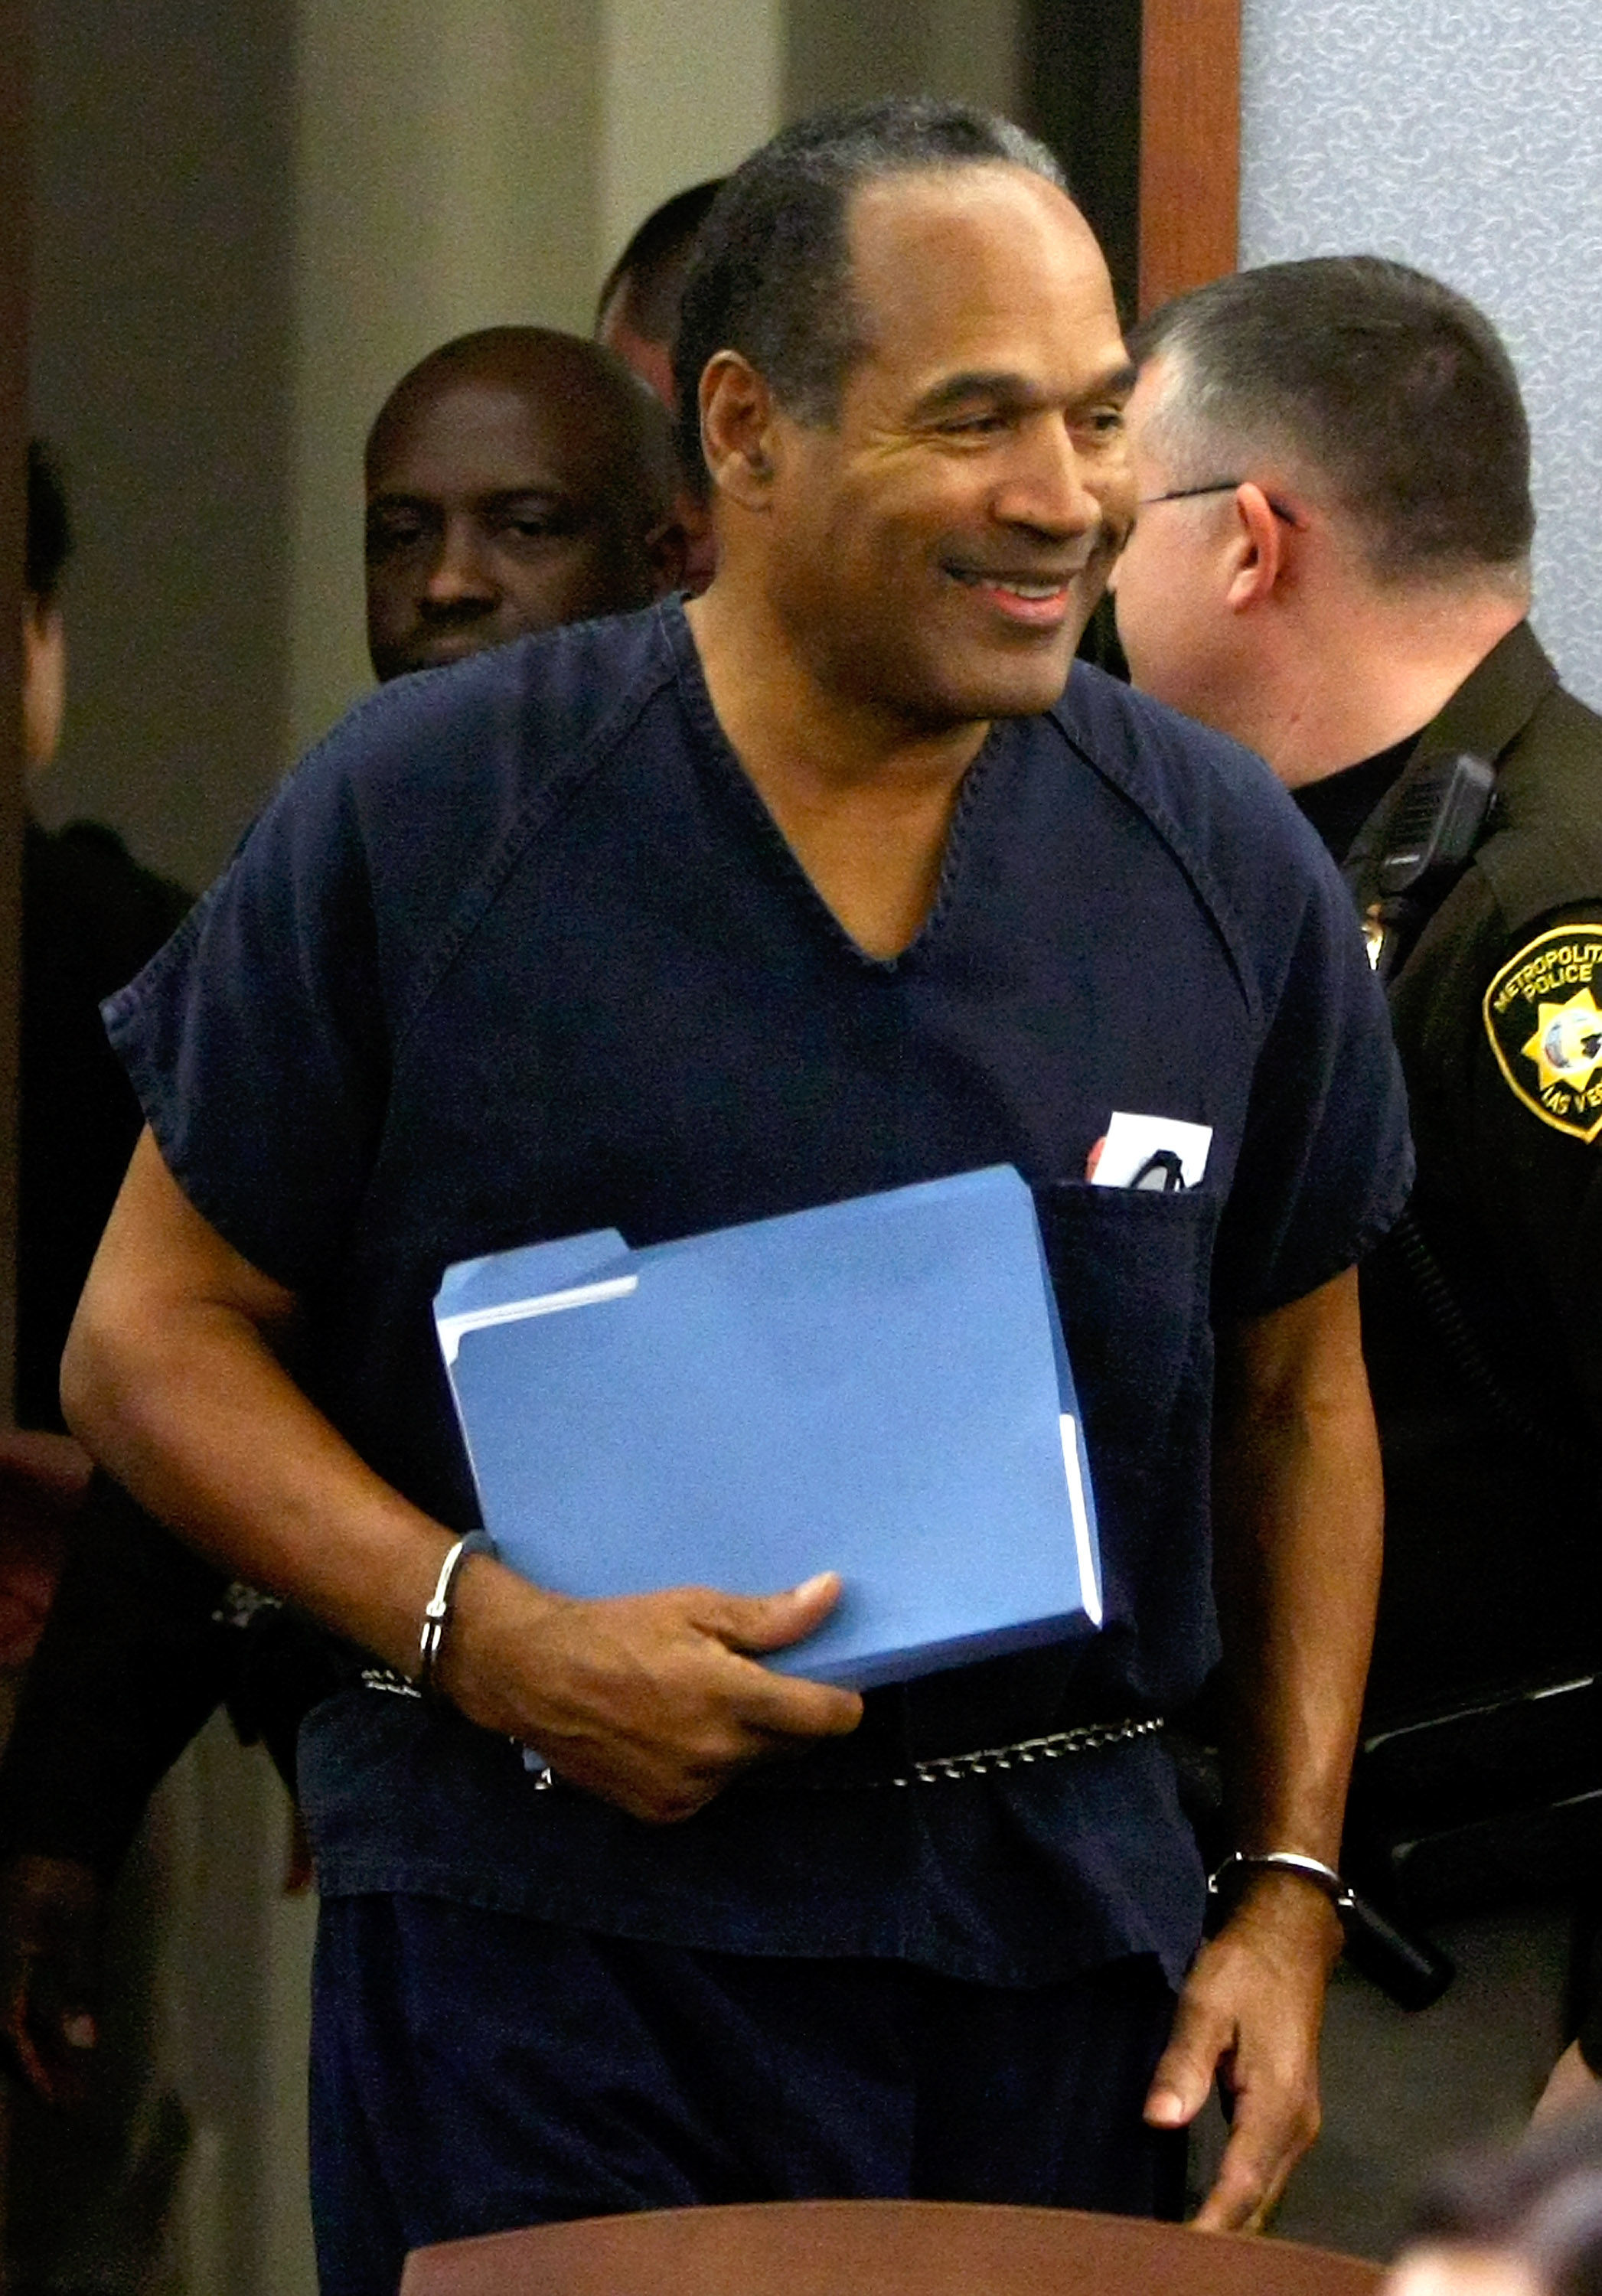 LAS VEGAS - DECEMBER 05:  O.J. Simpson smiles as he arrives in court for his sentencing hearing at the Clark County Regional Justice Center December 5, 2008 in Las Vegas, Nevada. Simpson and co-defendant Clarence 'C.J.' Stewart were sentenced on 12 charge